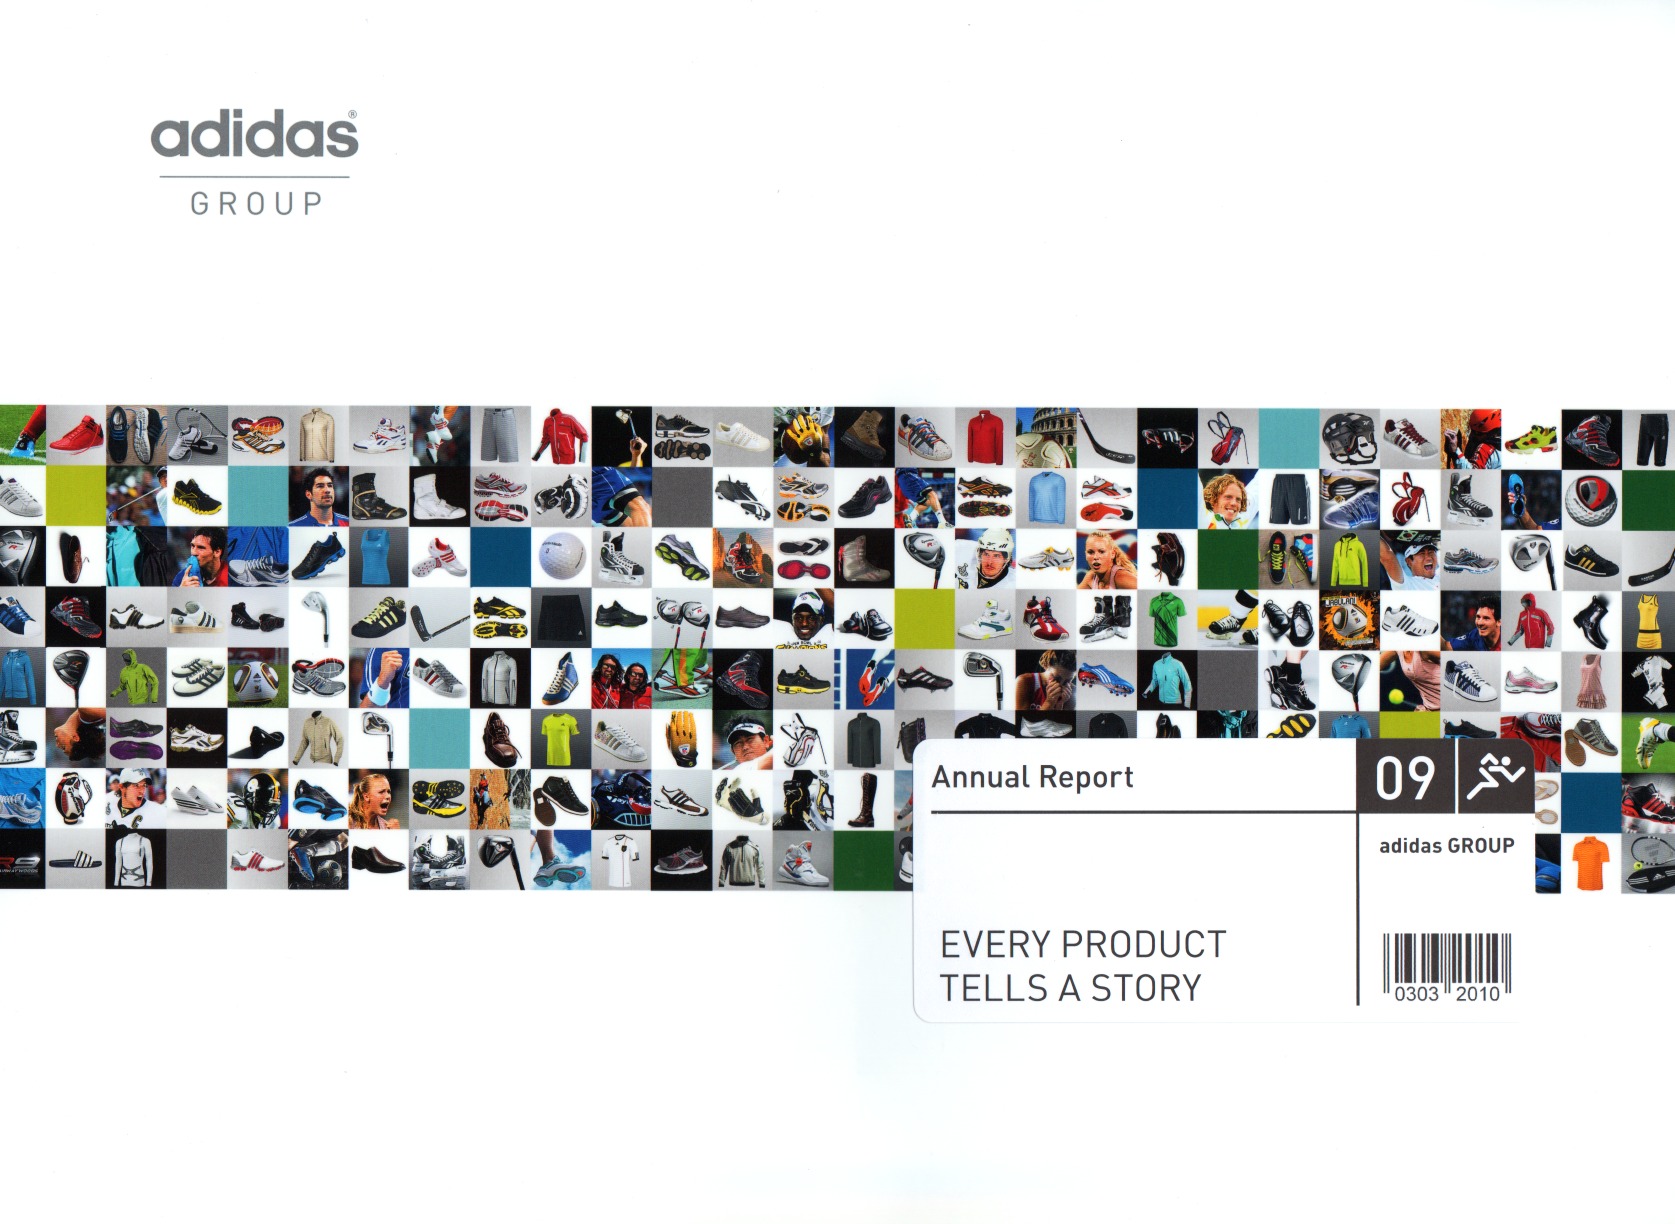 LACP 2009 Vision Awards Annual Report Competition | adidas Group /  HunterLebron